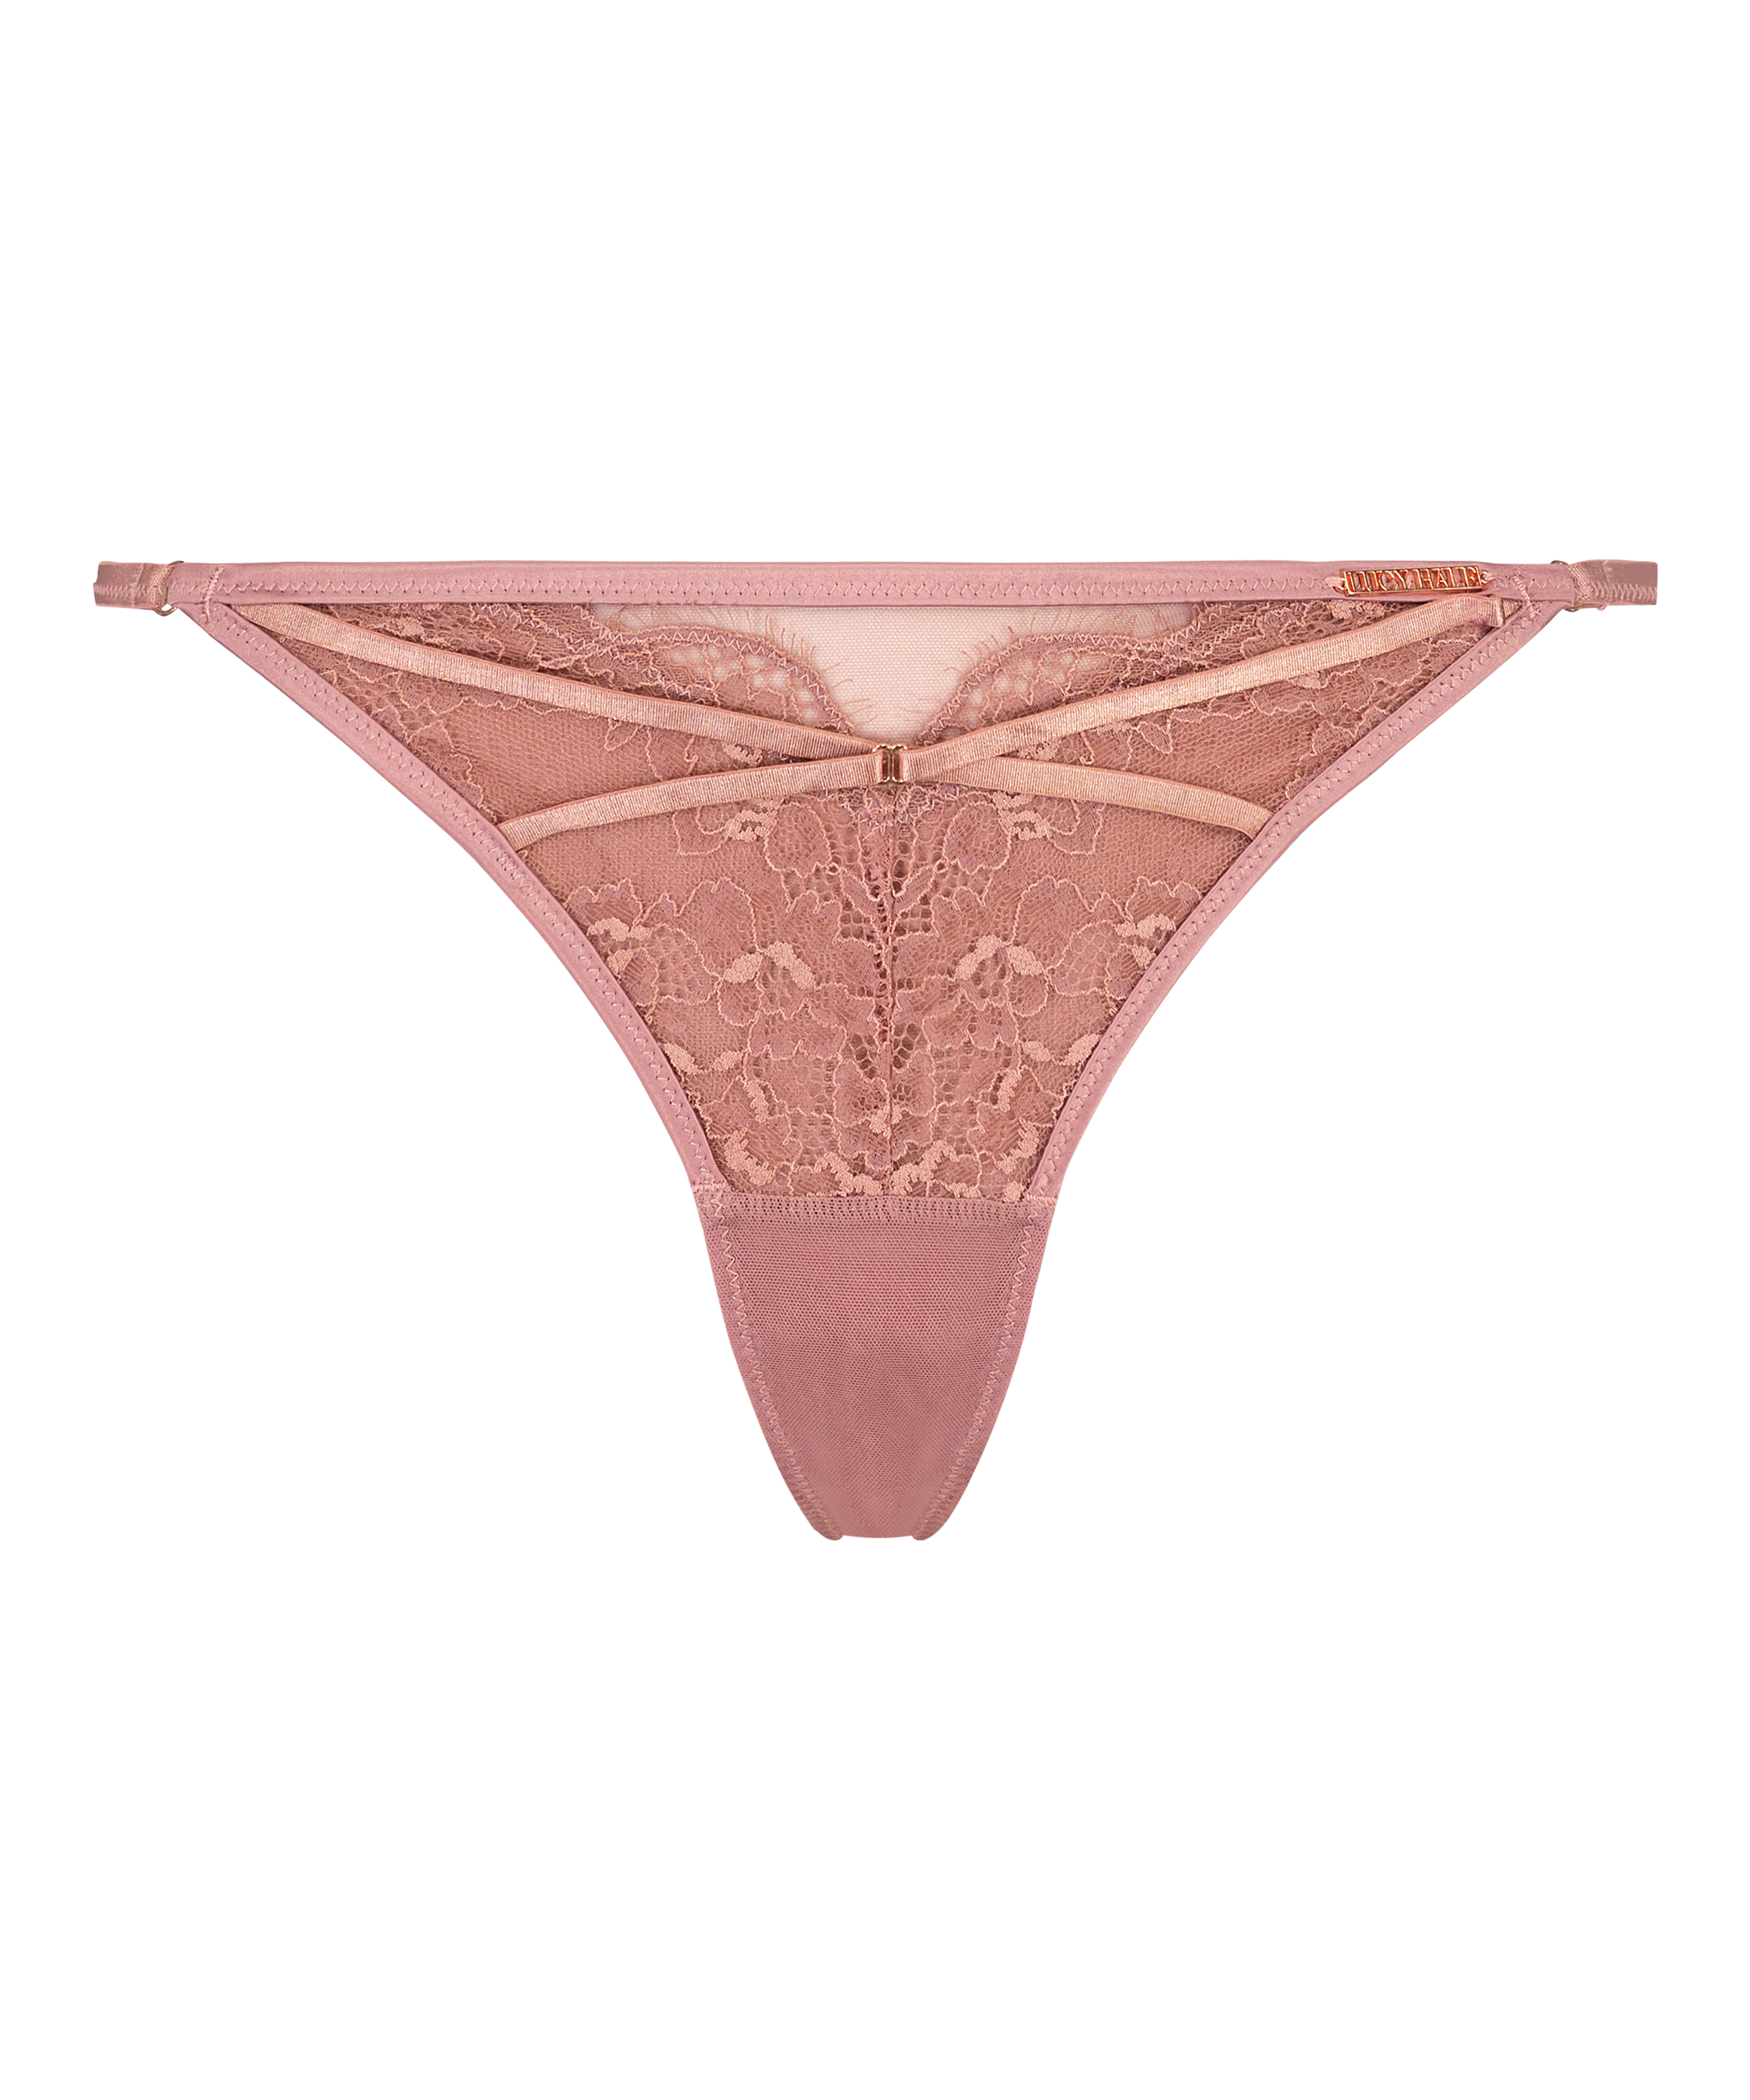 Margaret thong Lucy Hale for €14.99 - Thongs - Hunkemöller